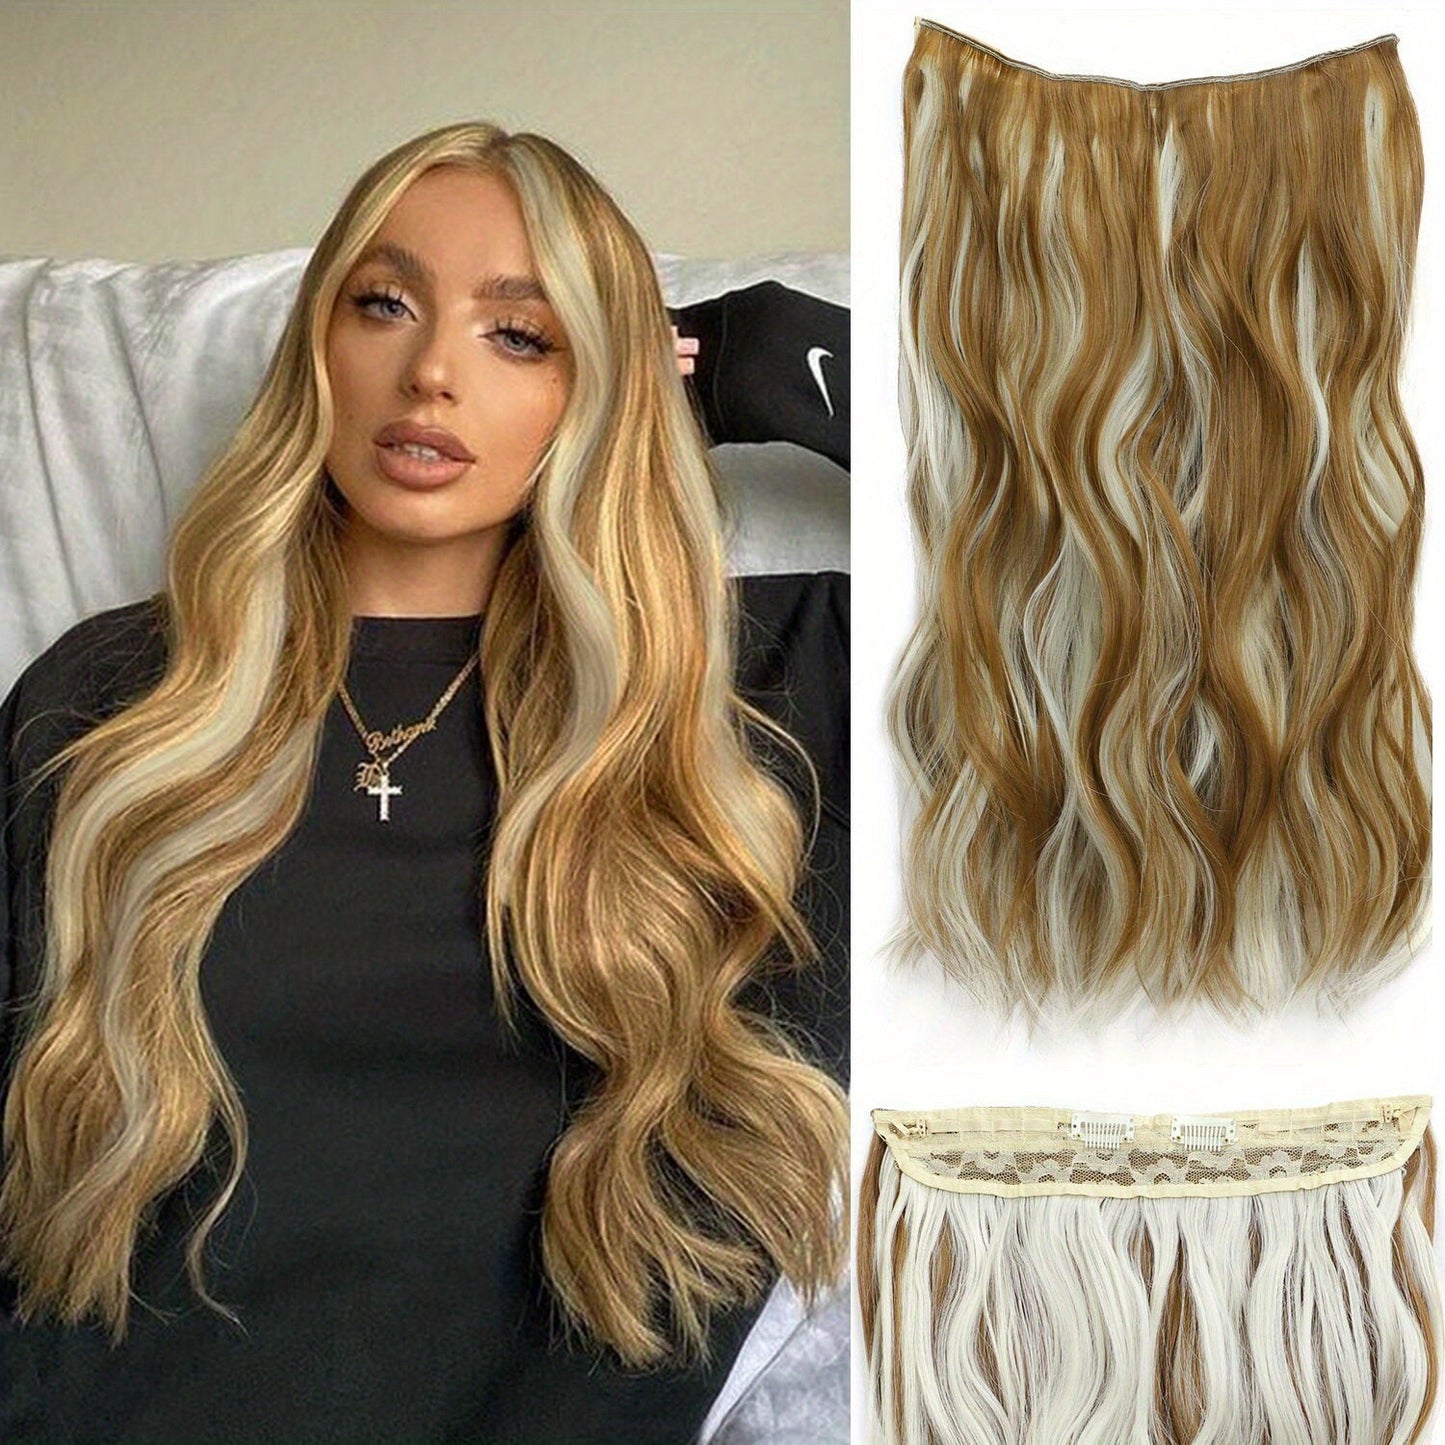 Invisible Wire Hair Extensions Long 20 Inches Wavy Hair Extensions With Adjustable Size Invisible Wire Hairpieces For Women - LESSANA